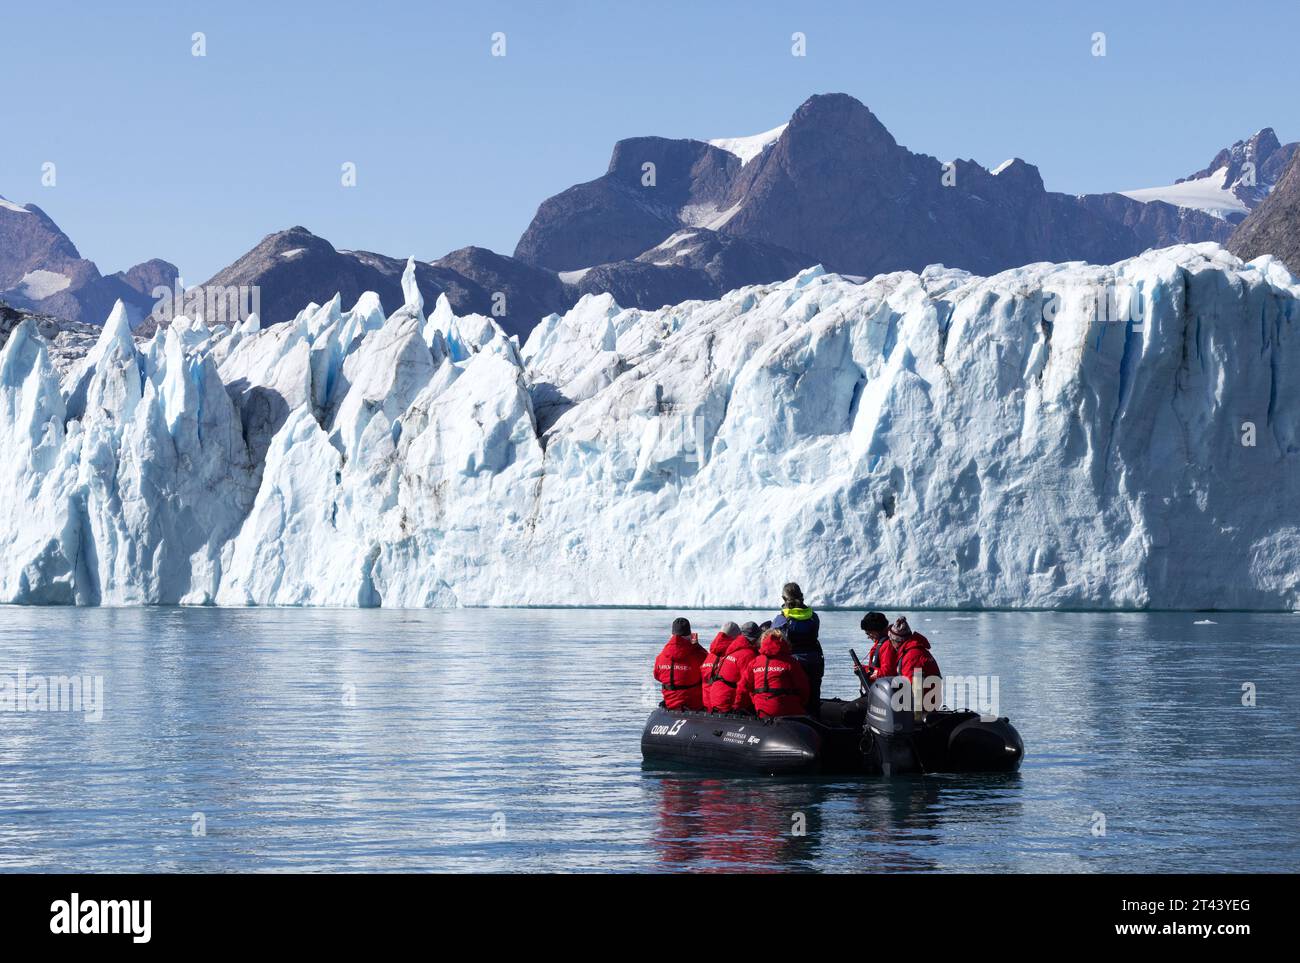 Adventure travel - Tourists in a zodiac inflatable getting a close view of the Thrym Glacier, Skjoldungen fjord, East Greenland - Arctic Travel Stock Photo